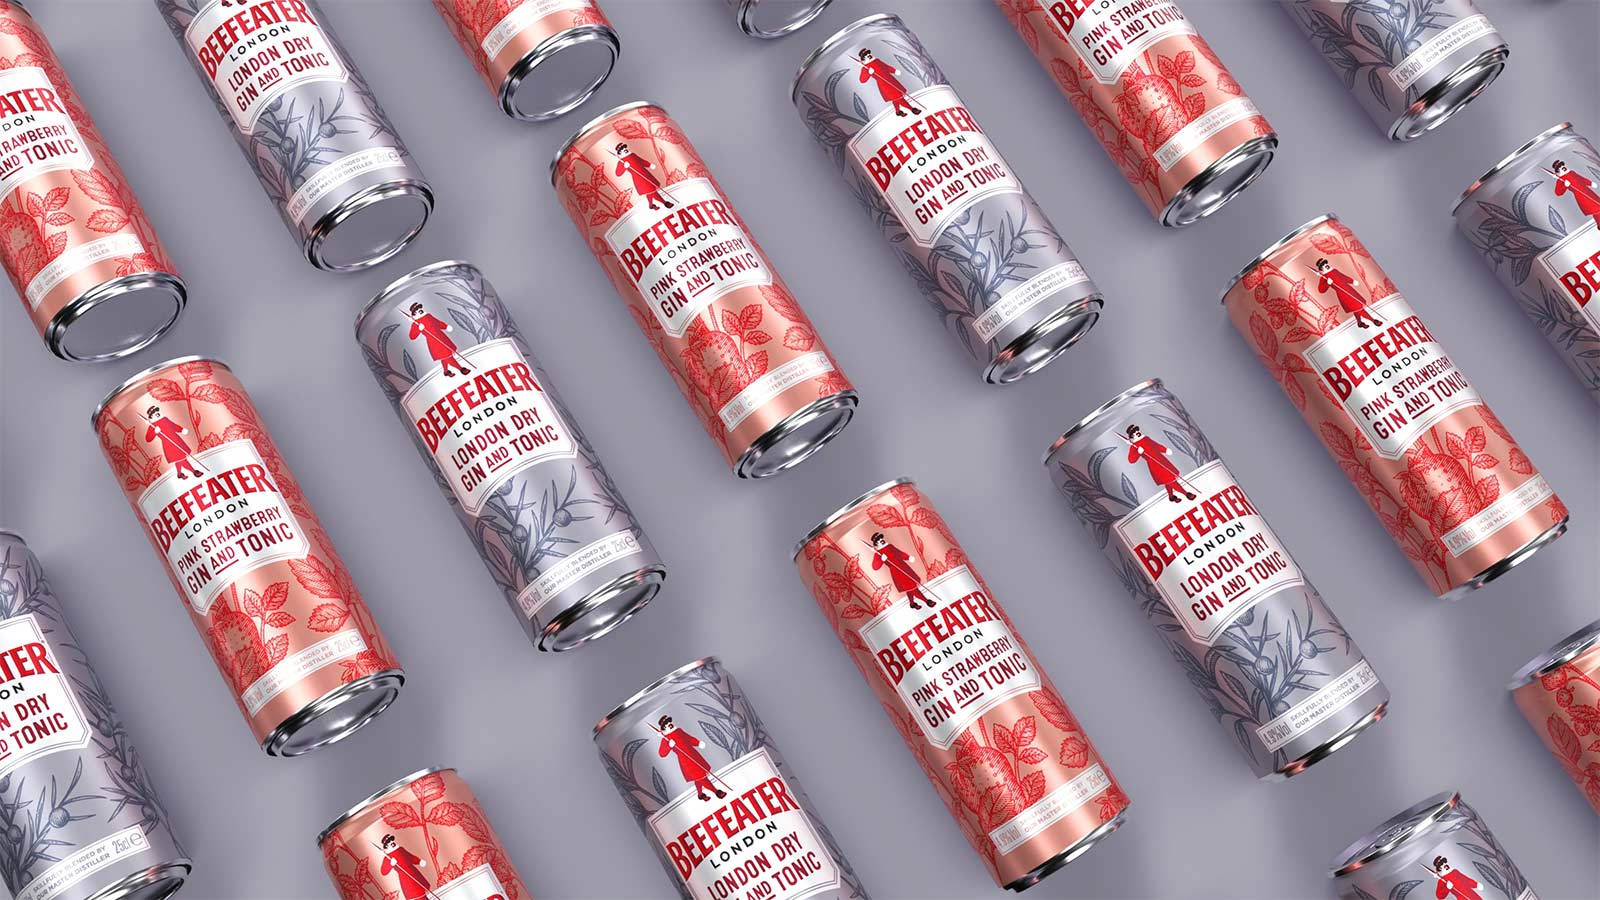 Beefeater Cans Arranged Wallpaper